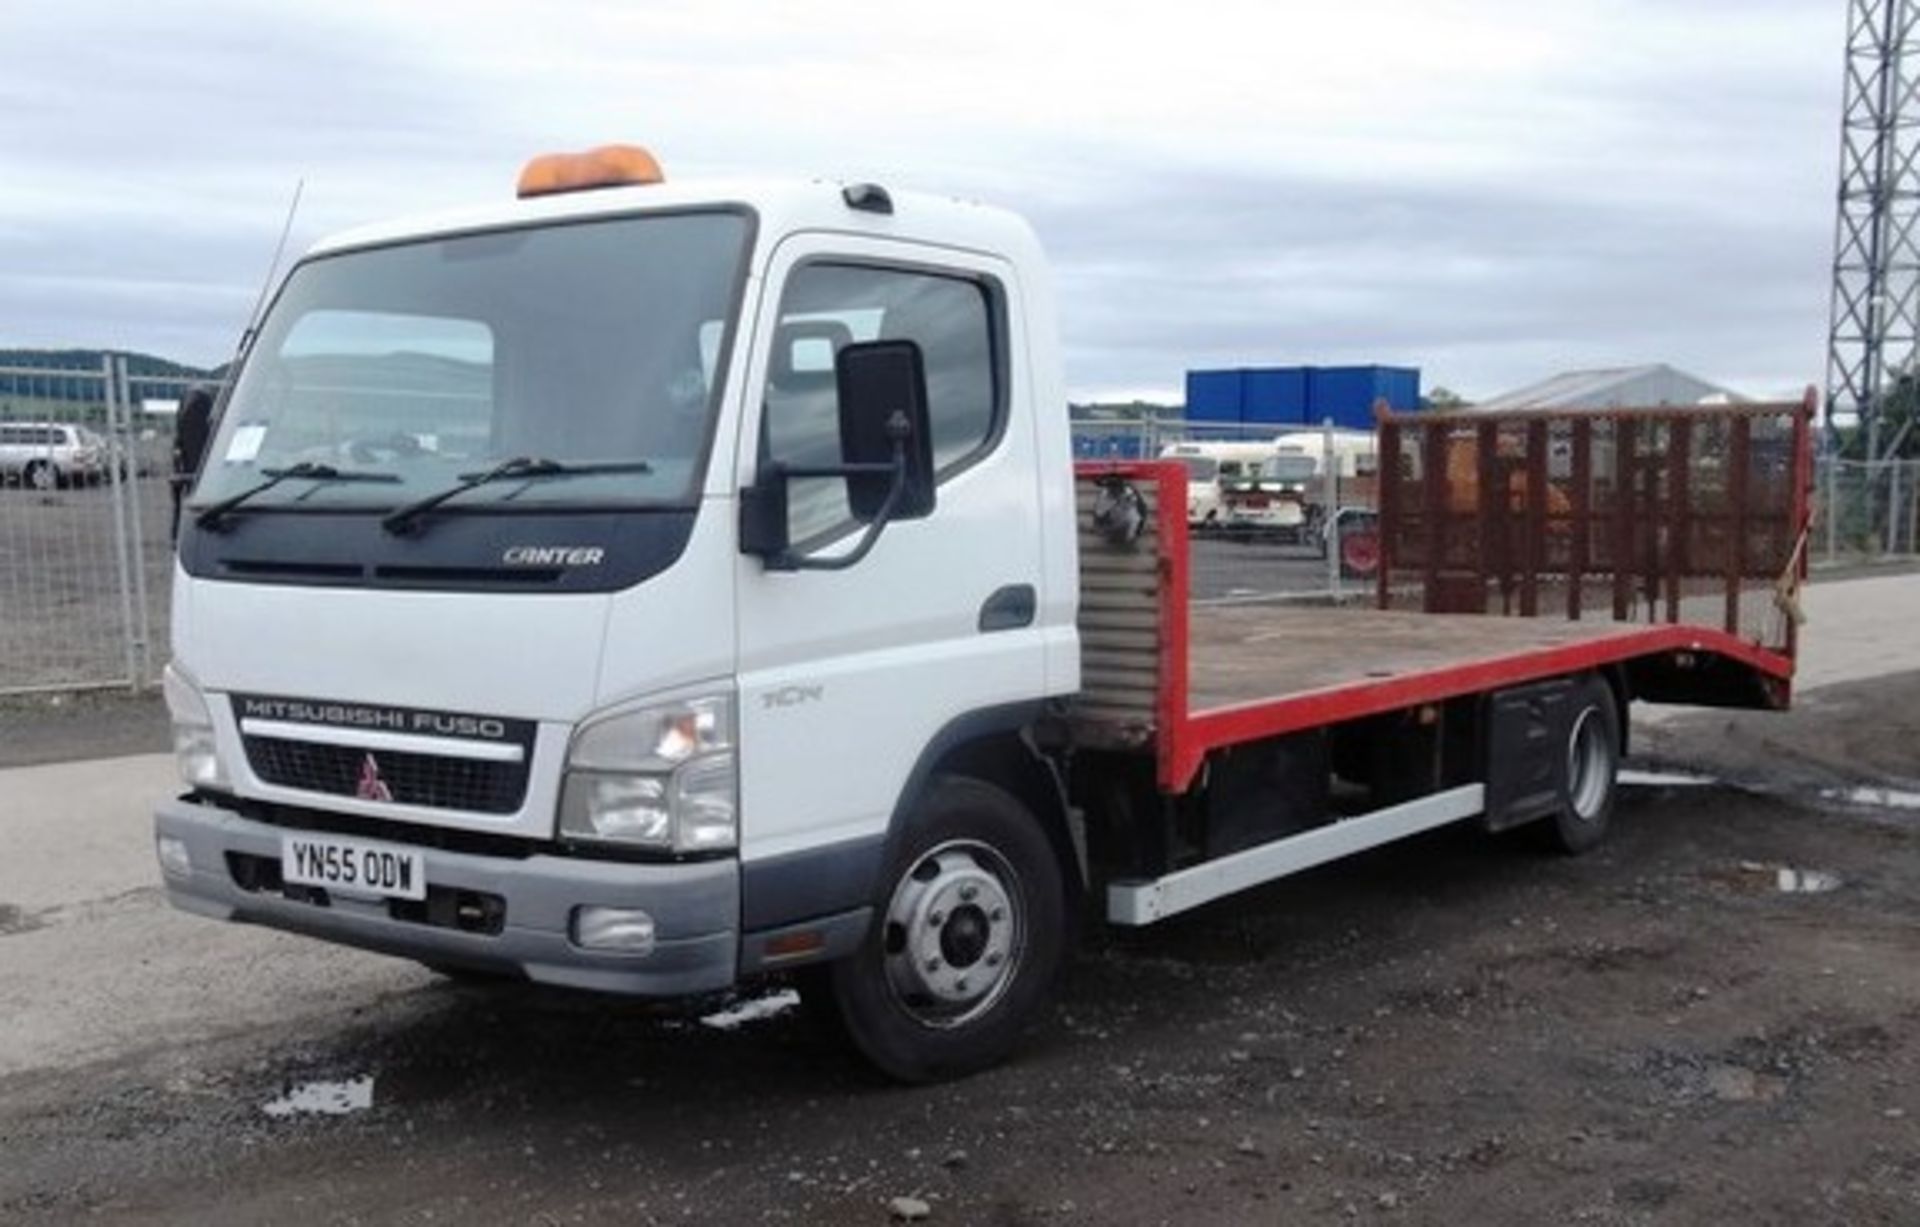 MITSUBISHI CANTER 75 7C14 - 3908cc
Body: 2 Dr Truck
Color: White
First Reg: 01/09/2005
Doors: 2
MOT: - Image 2 of 16